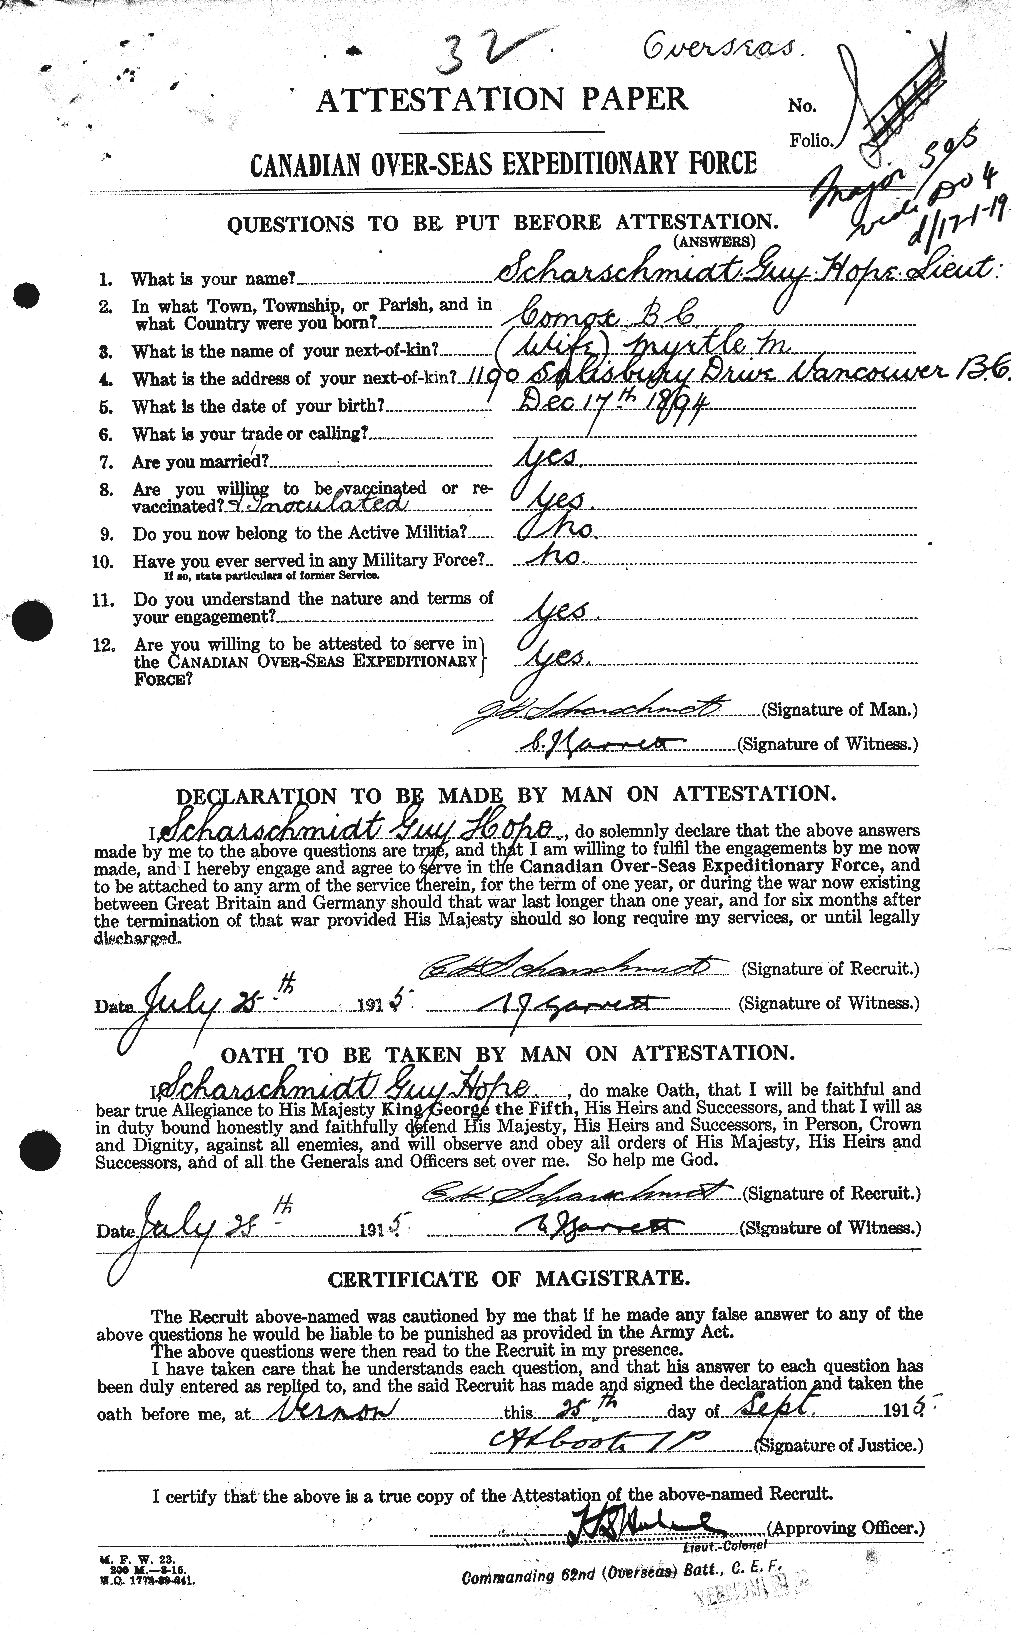 Personnel Records of the First World War - CEF 081139a